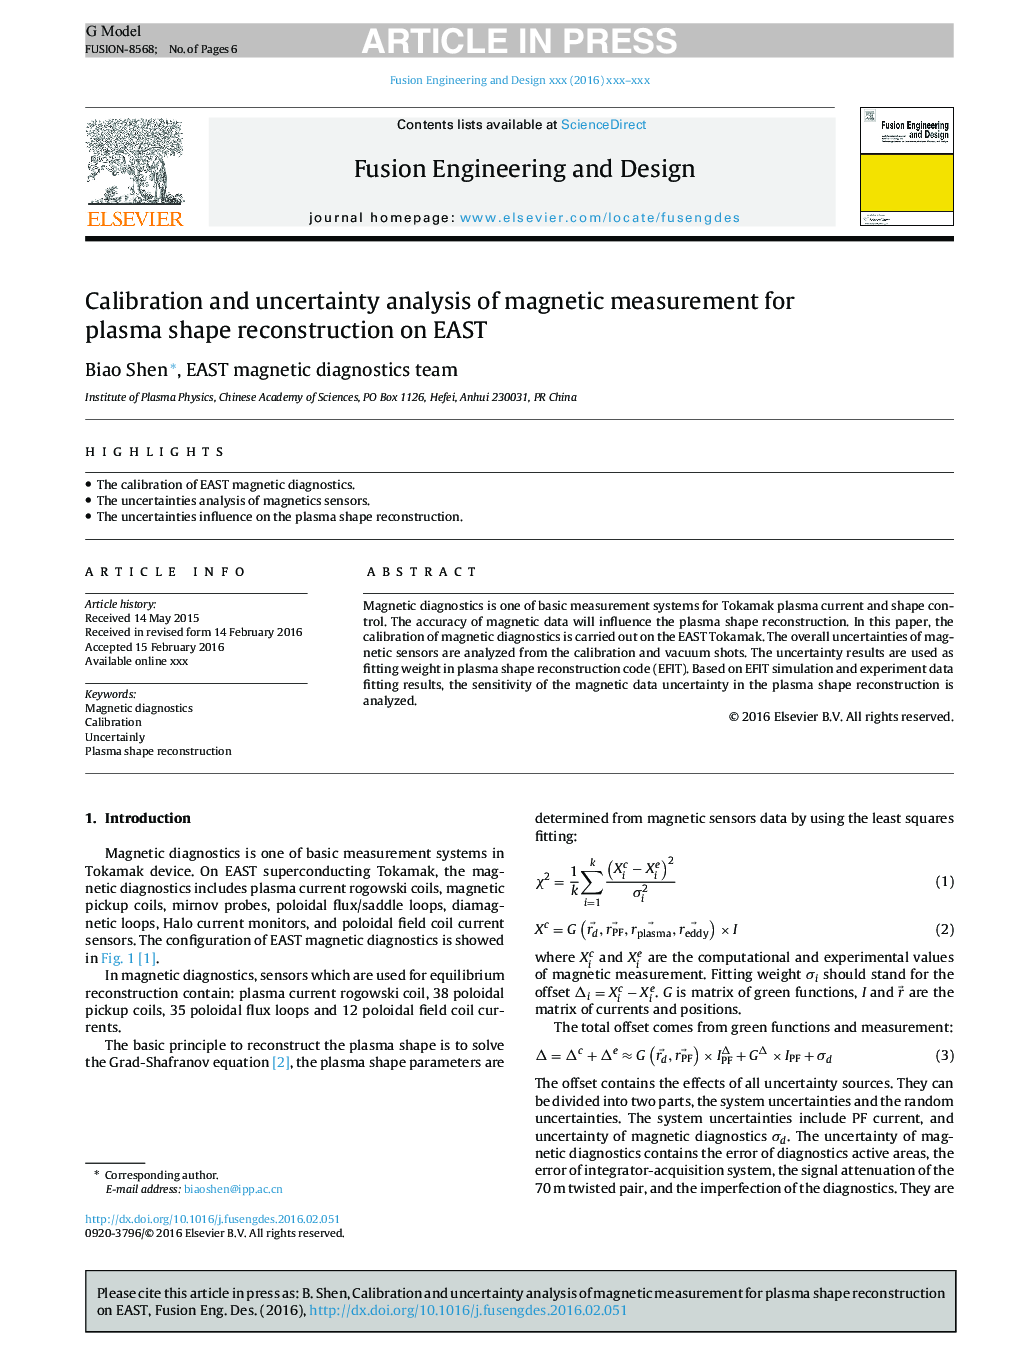 Calibration and uncertainty analysis of magnetic measurement for plasma shape reconstruction on EAST